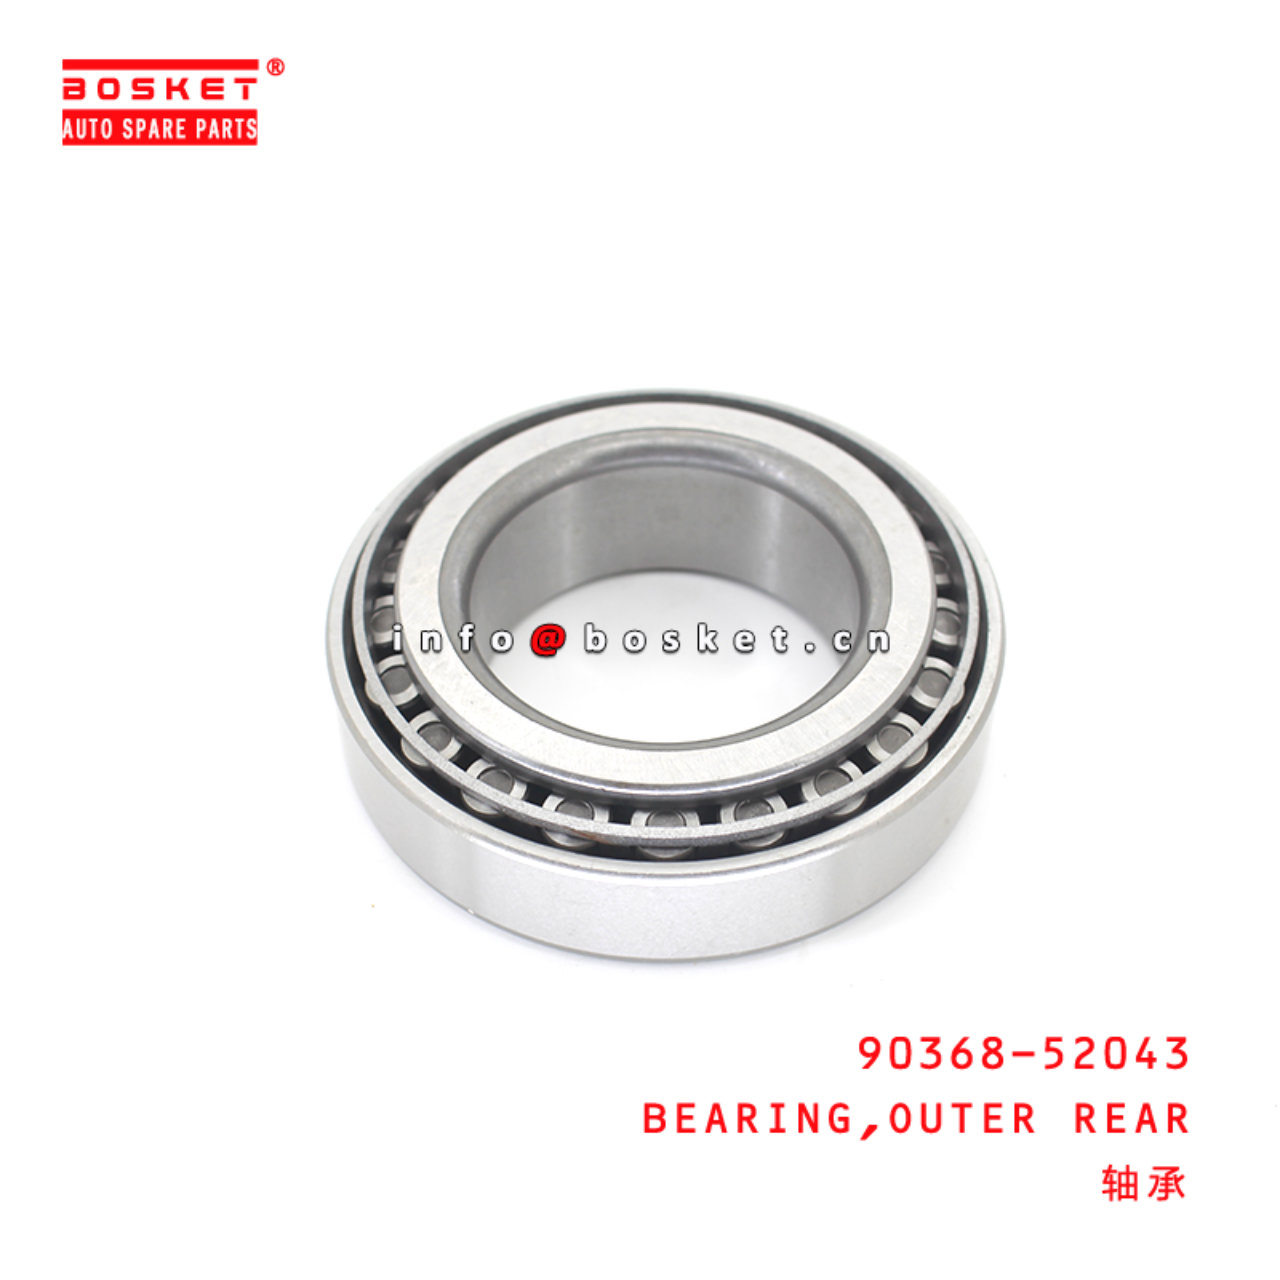 90368-52043 Outer Rear Bearing Suitable for ISUZU HINO700